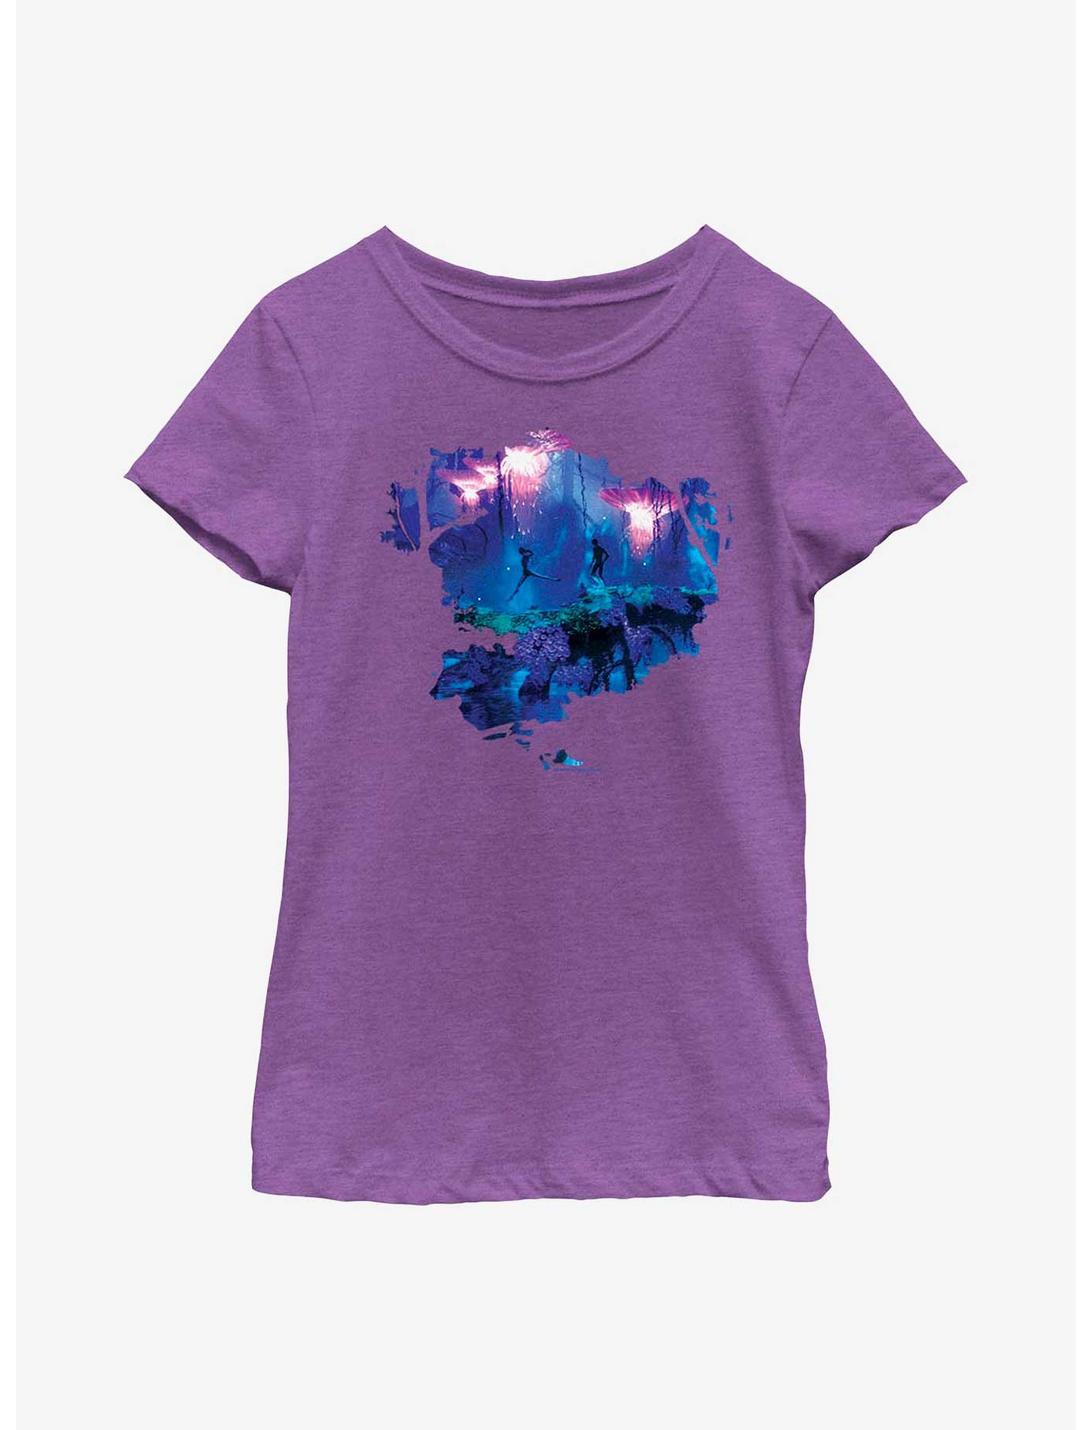 Avatar Jelly Forest Youth Girls T-Shirt, PURPLE BERRY, hi-res